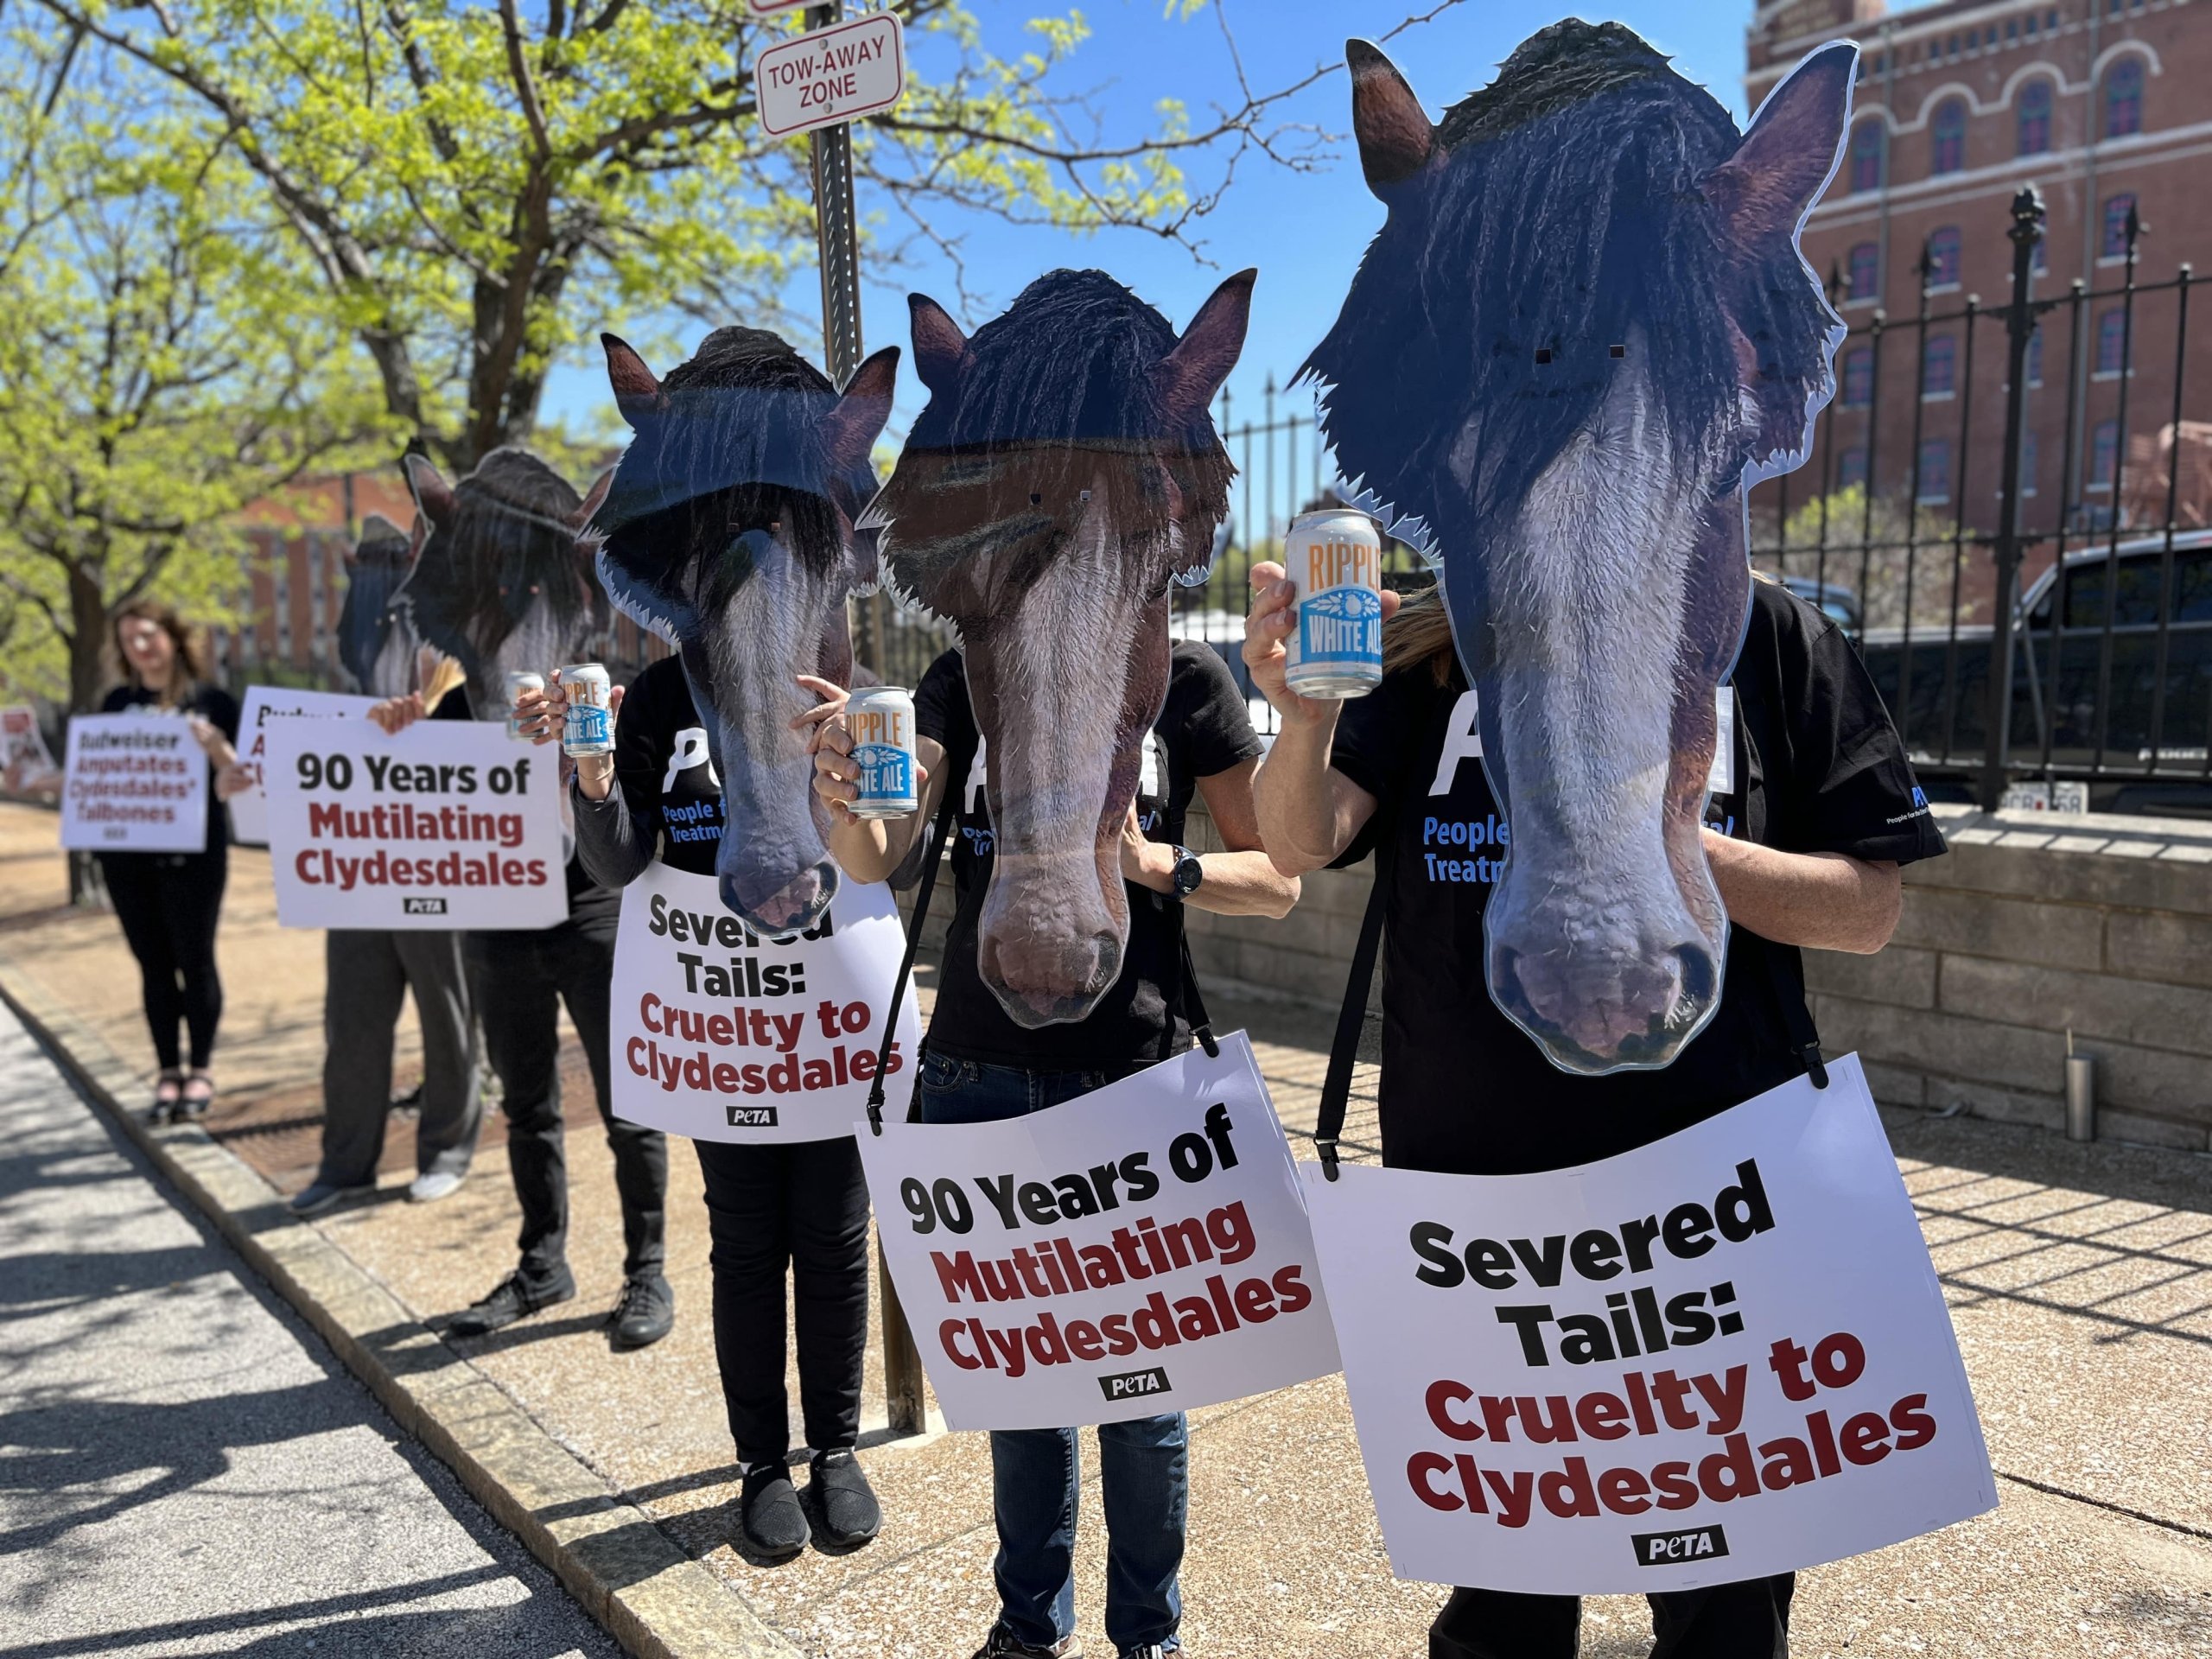 horse masked protesters in a row with signs against budweiser